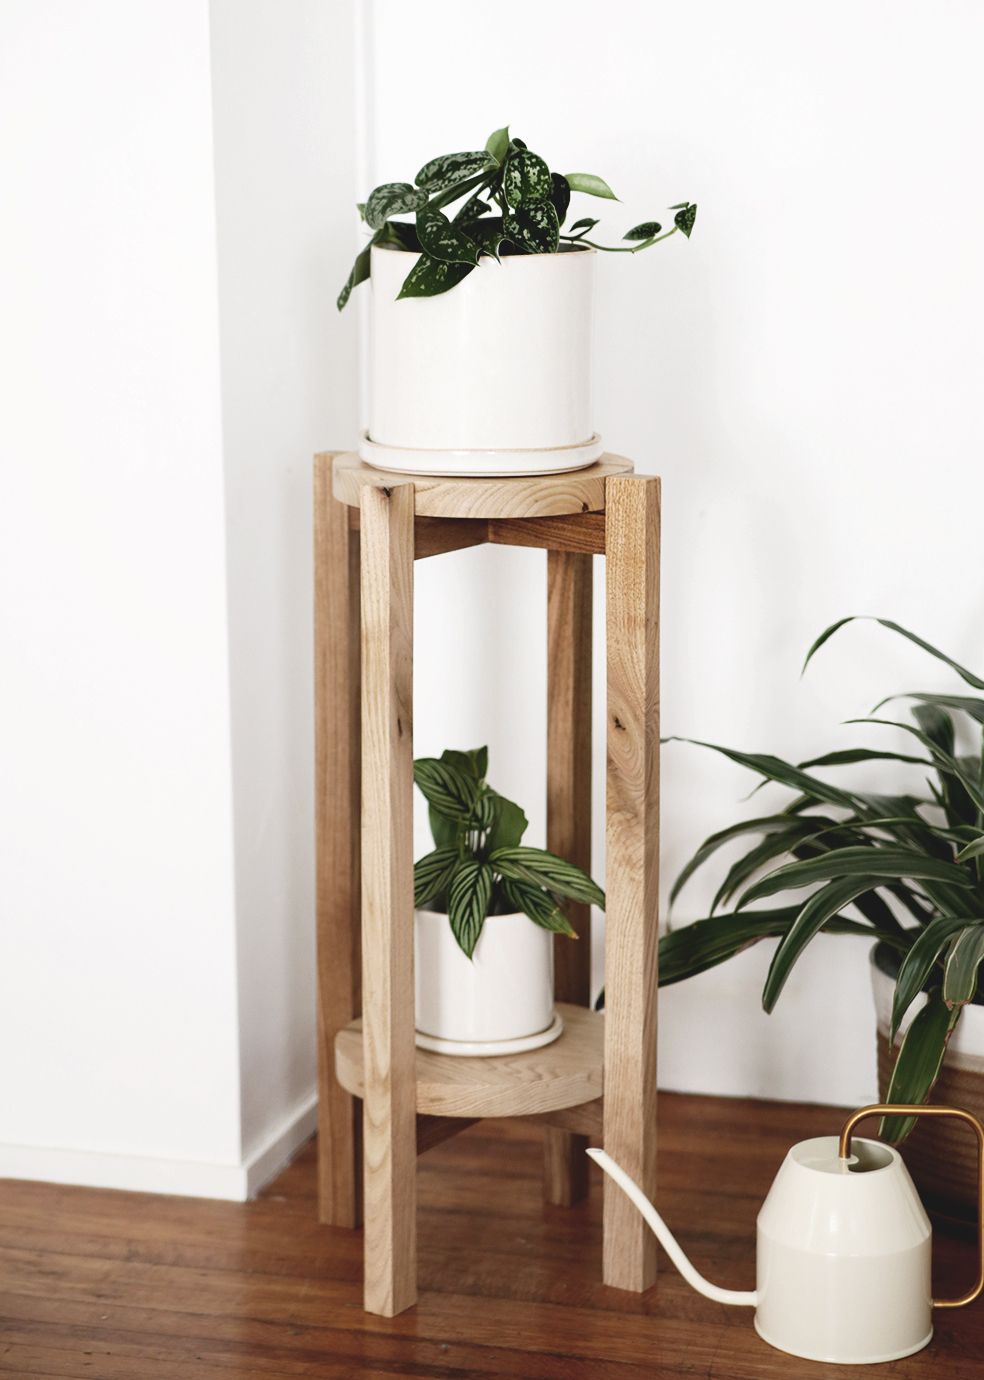 Diy Wood Plant Stand – A Simple Diy With A Video Tutorial Inside Wooden Plant Stands (View 5 of 15)